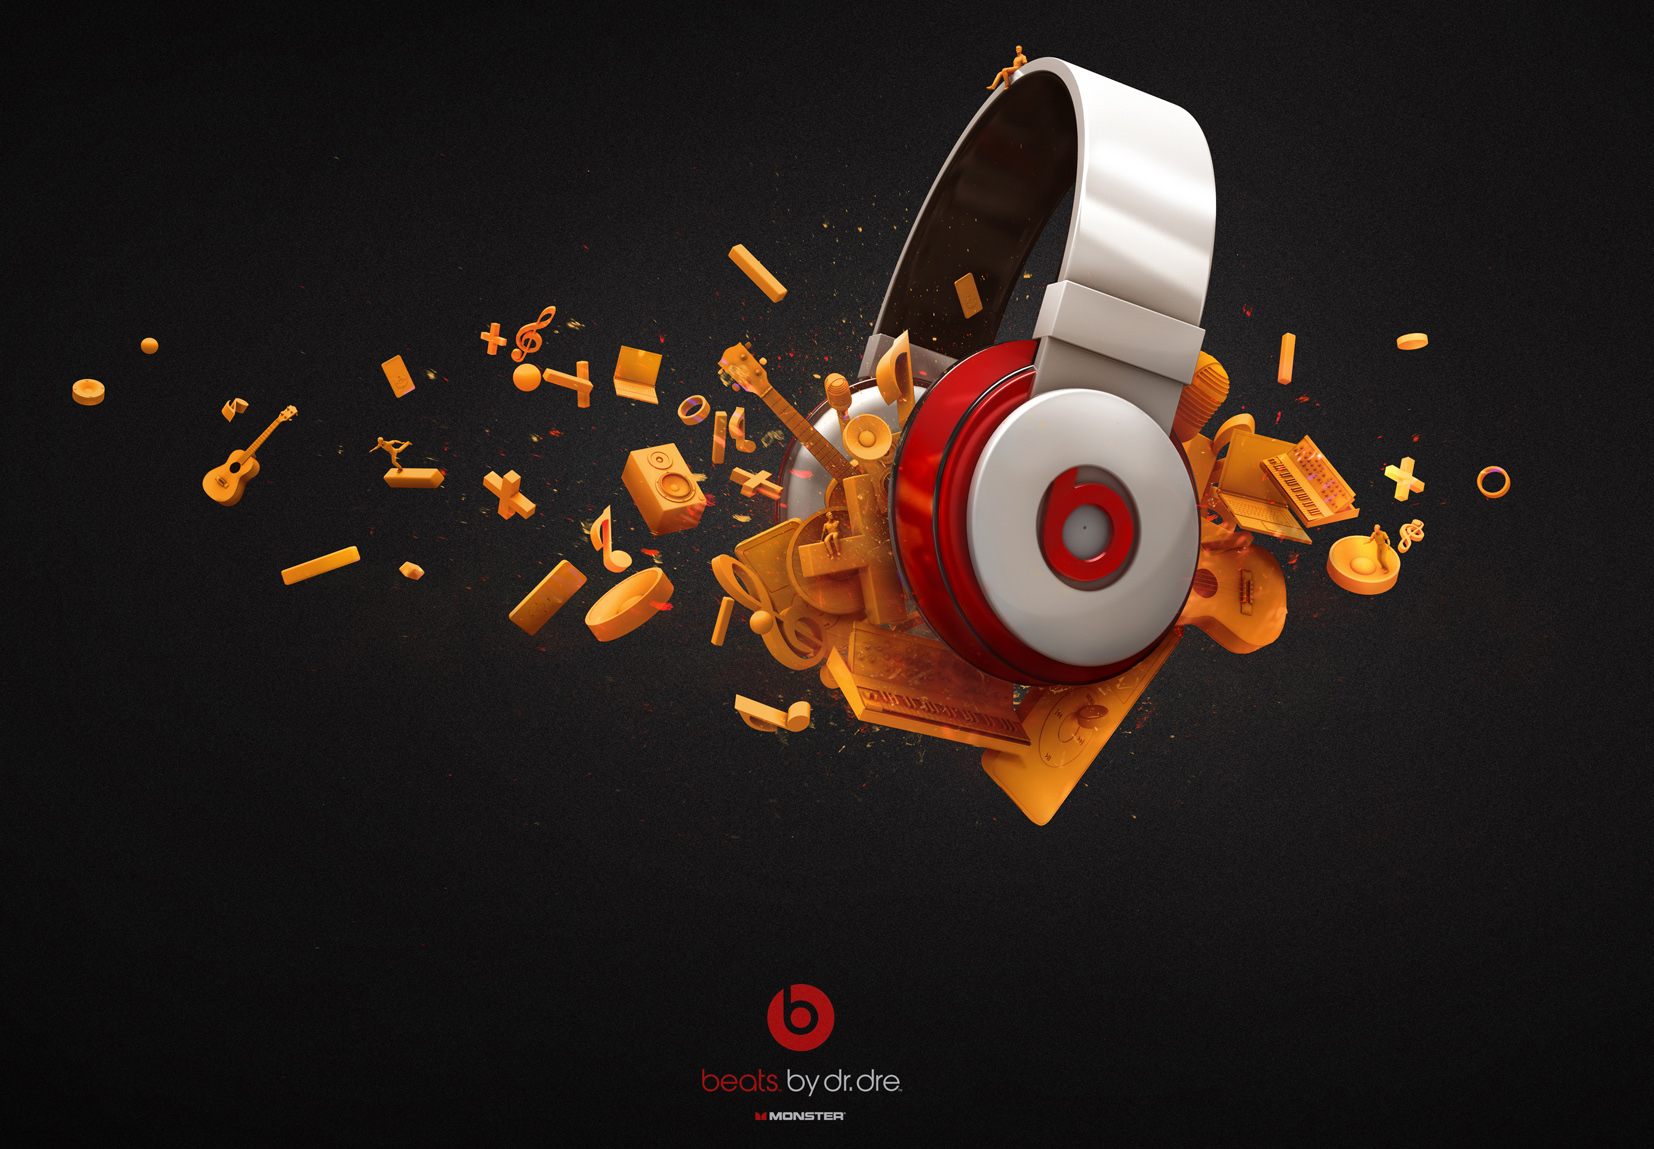 Beat by Dr. Dre